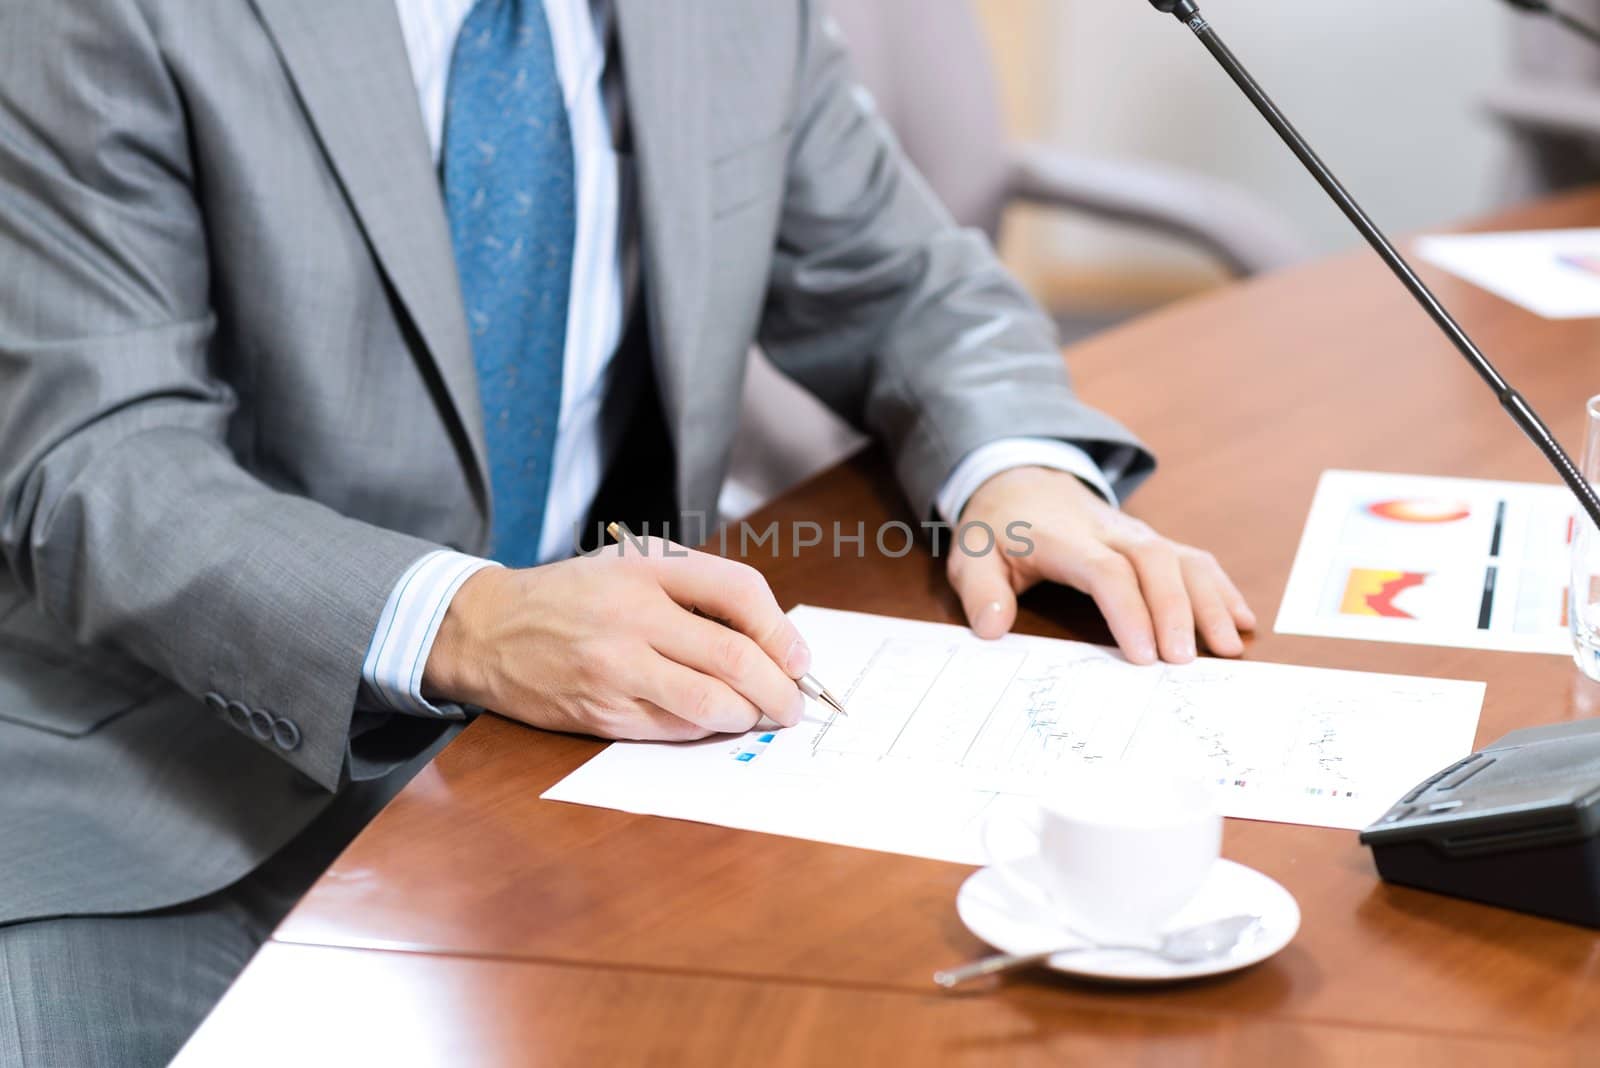 businessman taking notes, meeting businessmen at the table there are microphones and decomposition of business documents